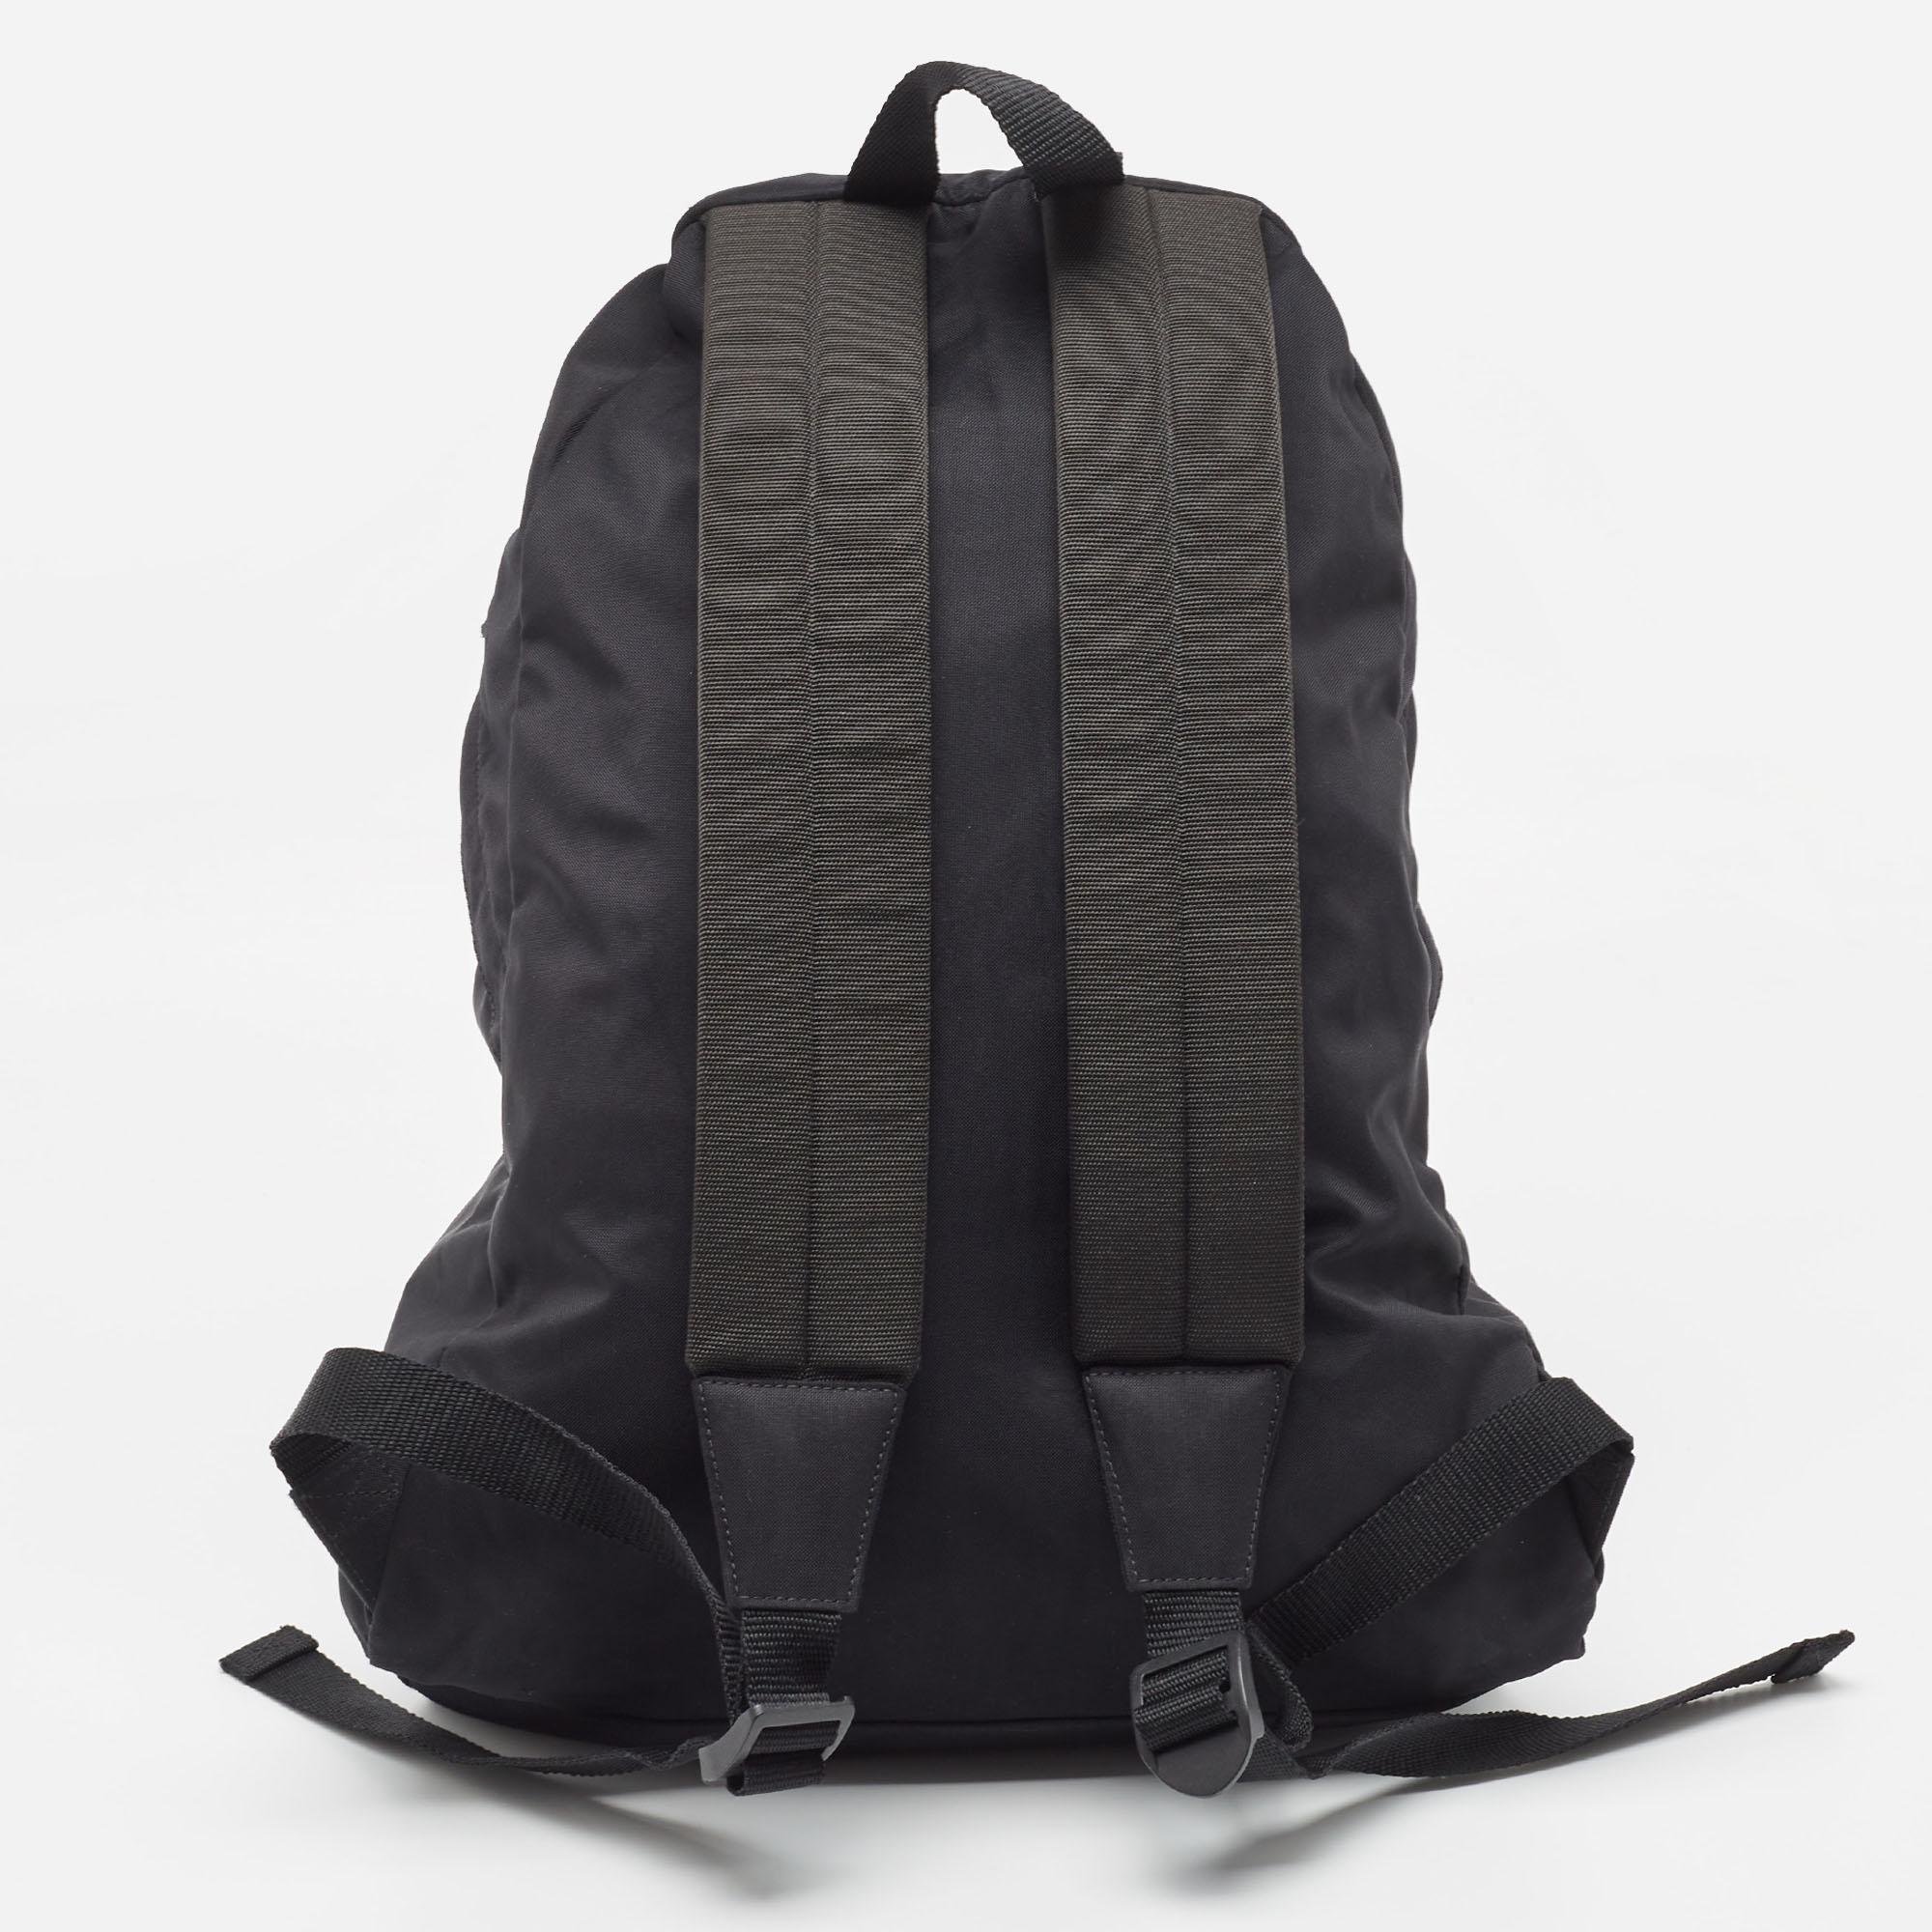 This practical and fashionable backpack will come in handy for daily use or as a style statement. It is smartly designed with a spacious interior for your belongings. Two shoulder straps make it ready to be yours.

Includes: Original Dustbag, Info